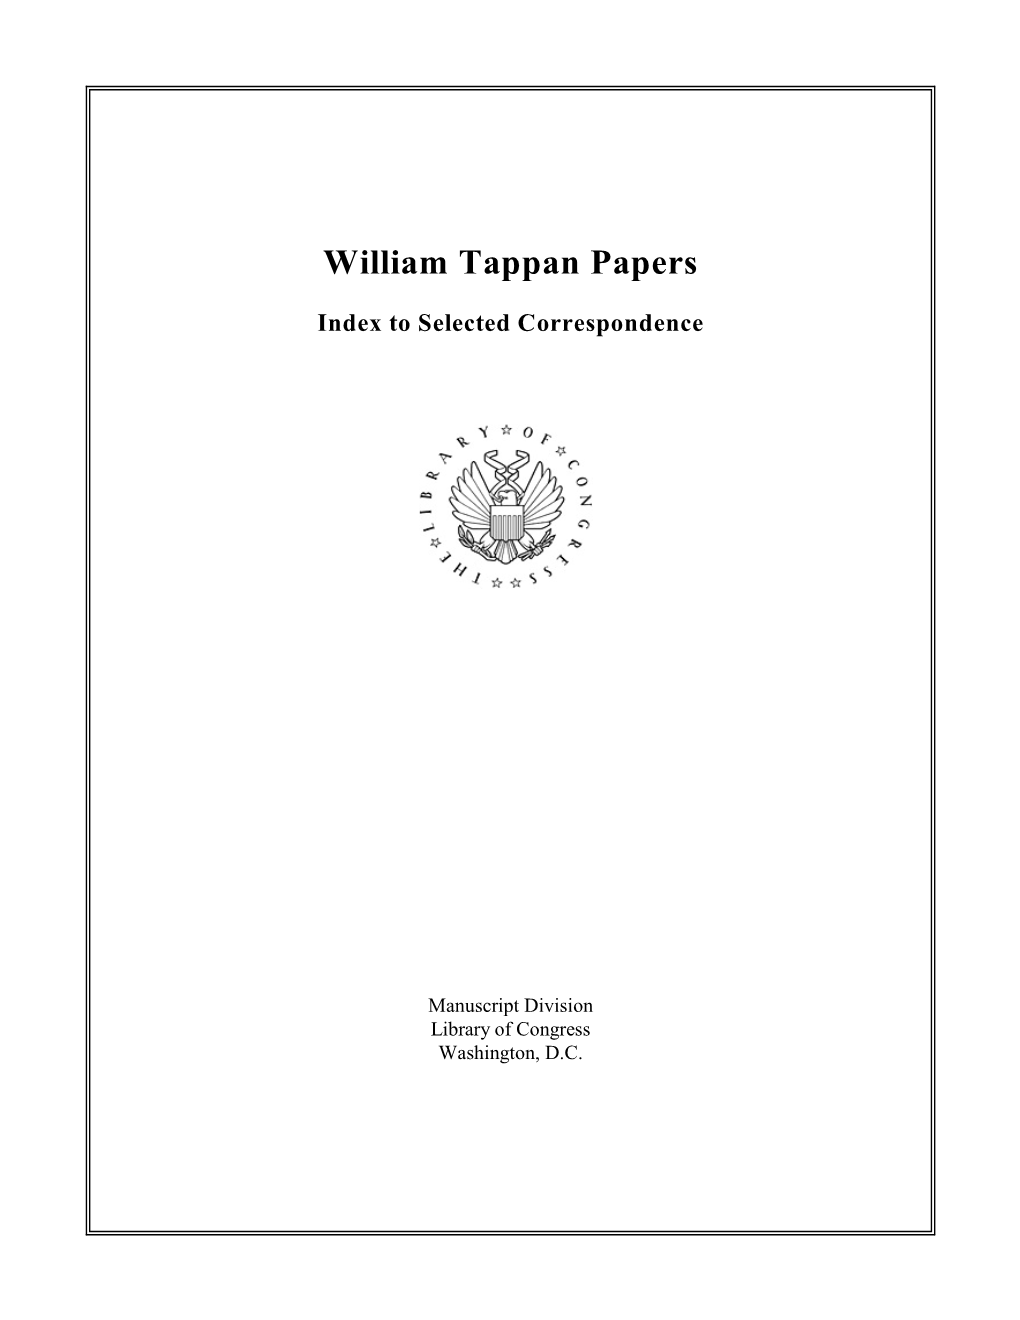 William Tappan Papers Index to Selected Correspondence